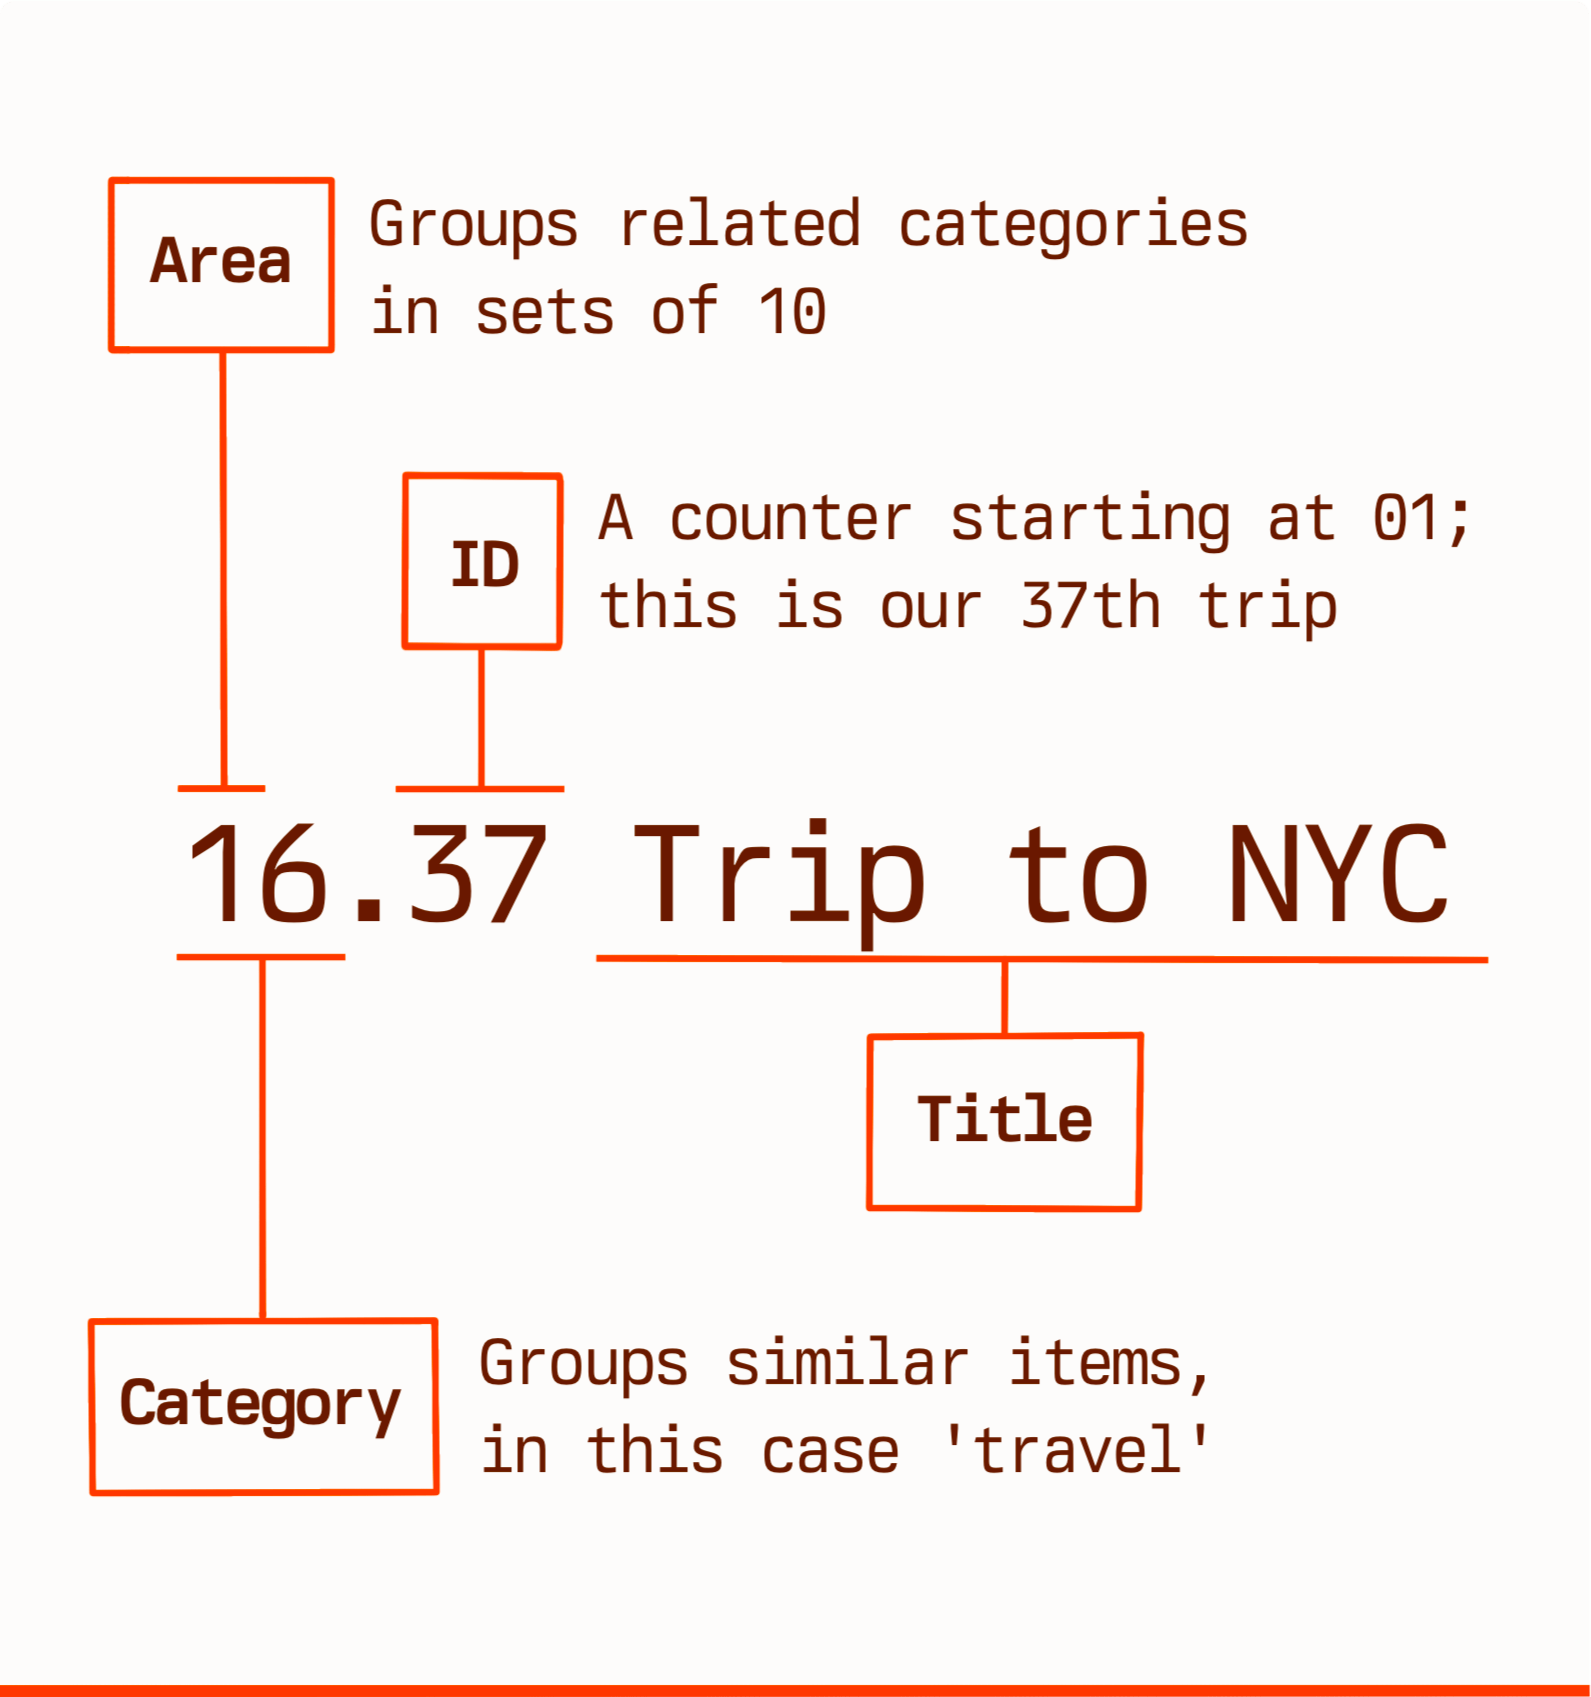 A diagram showing the structure of a Johnny.Decimal number. The number is 16.37 and it explains how the '1' is an area, which groups related categories in sets of 10. The '16' is the category, in this case 'travel'. And '37' is just an ID; they start at 01. The title of this, our 37th travel thing, is 'Trip to NYC'.